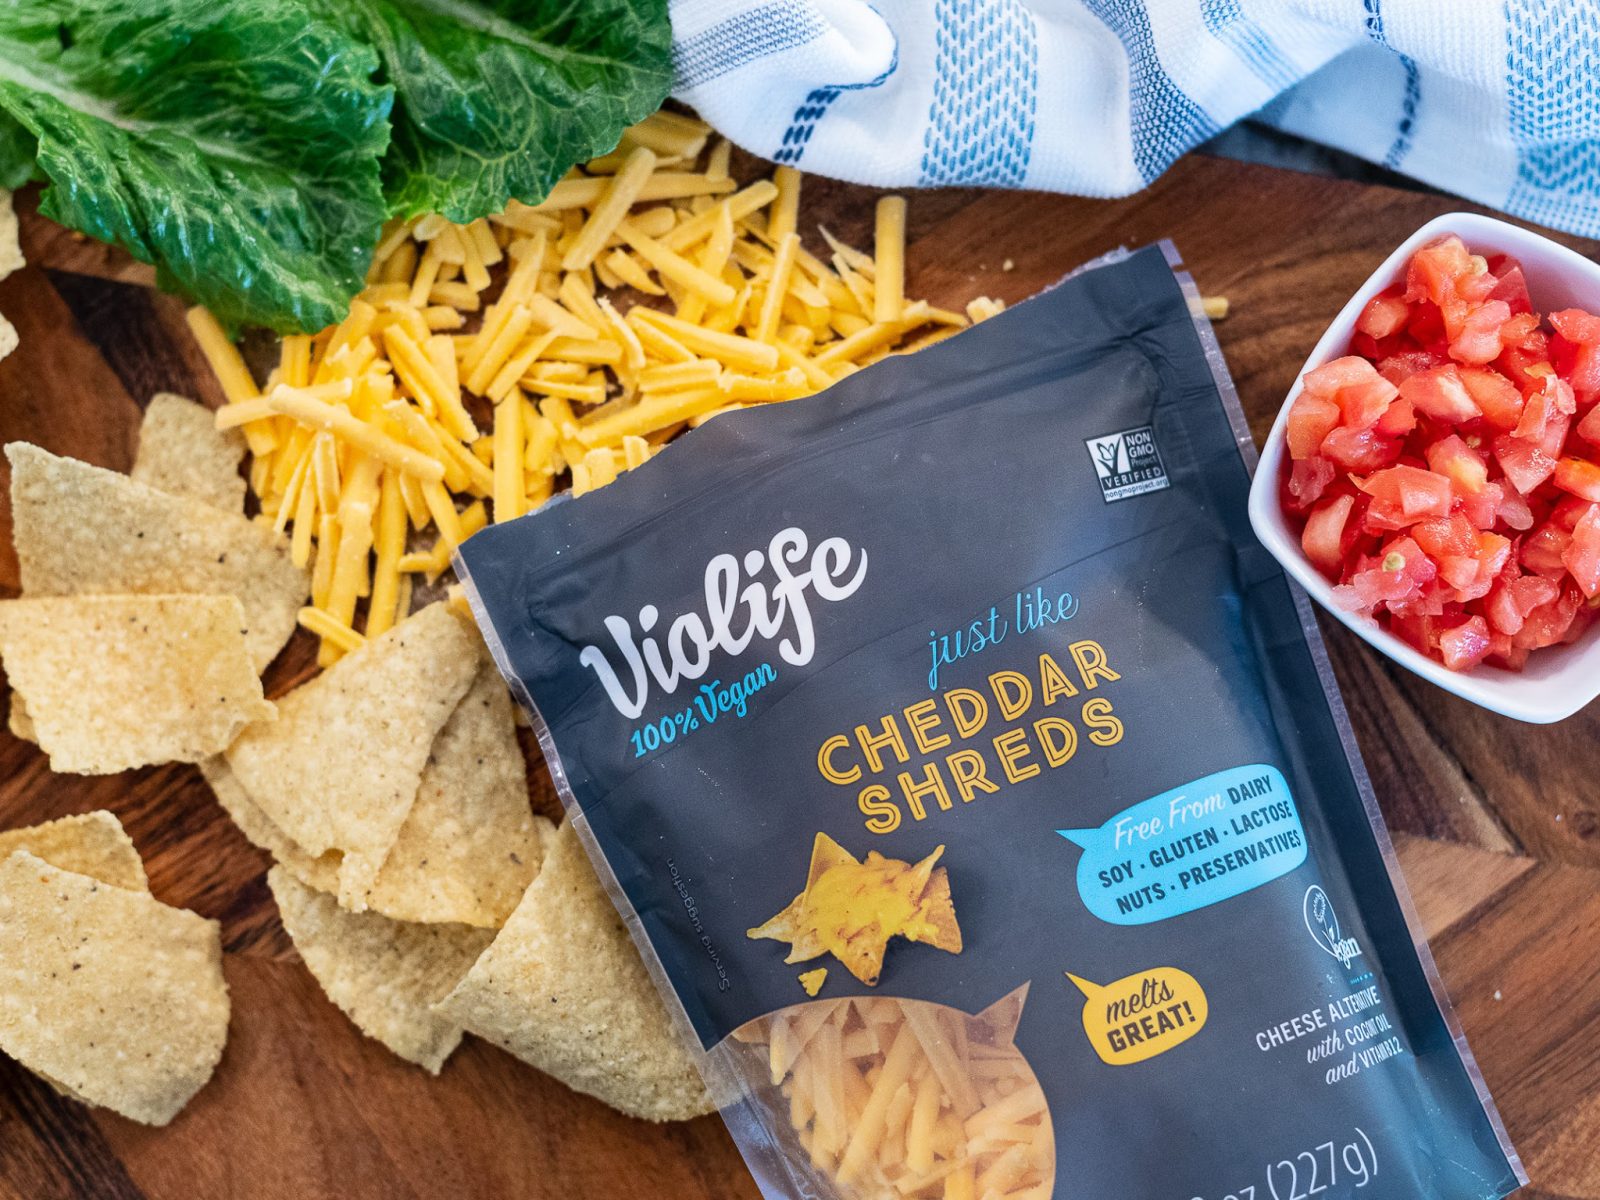 Violife Just Like Cheese As Low As $1.49 At Kroger